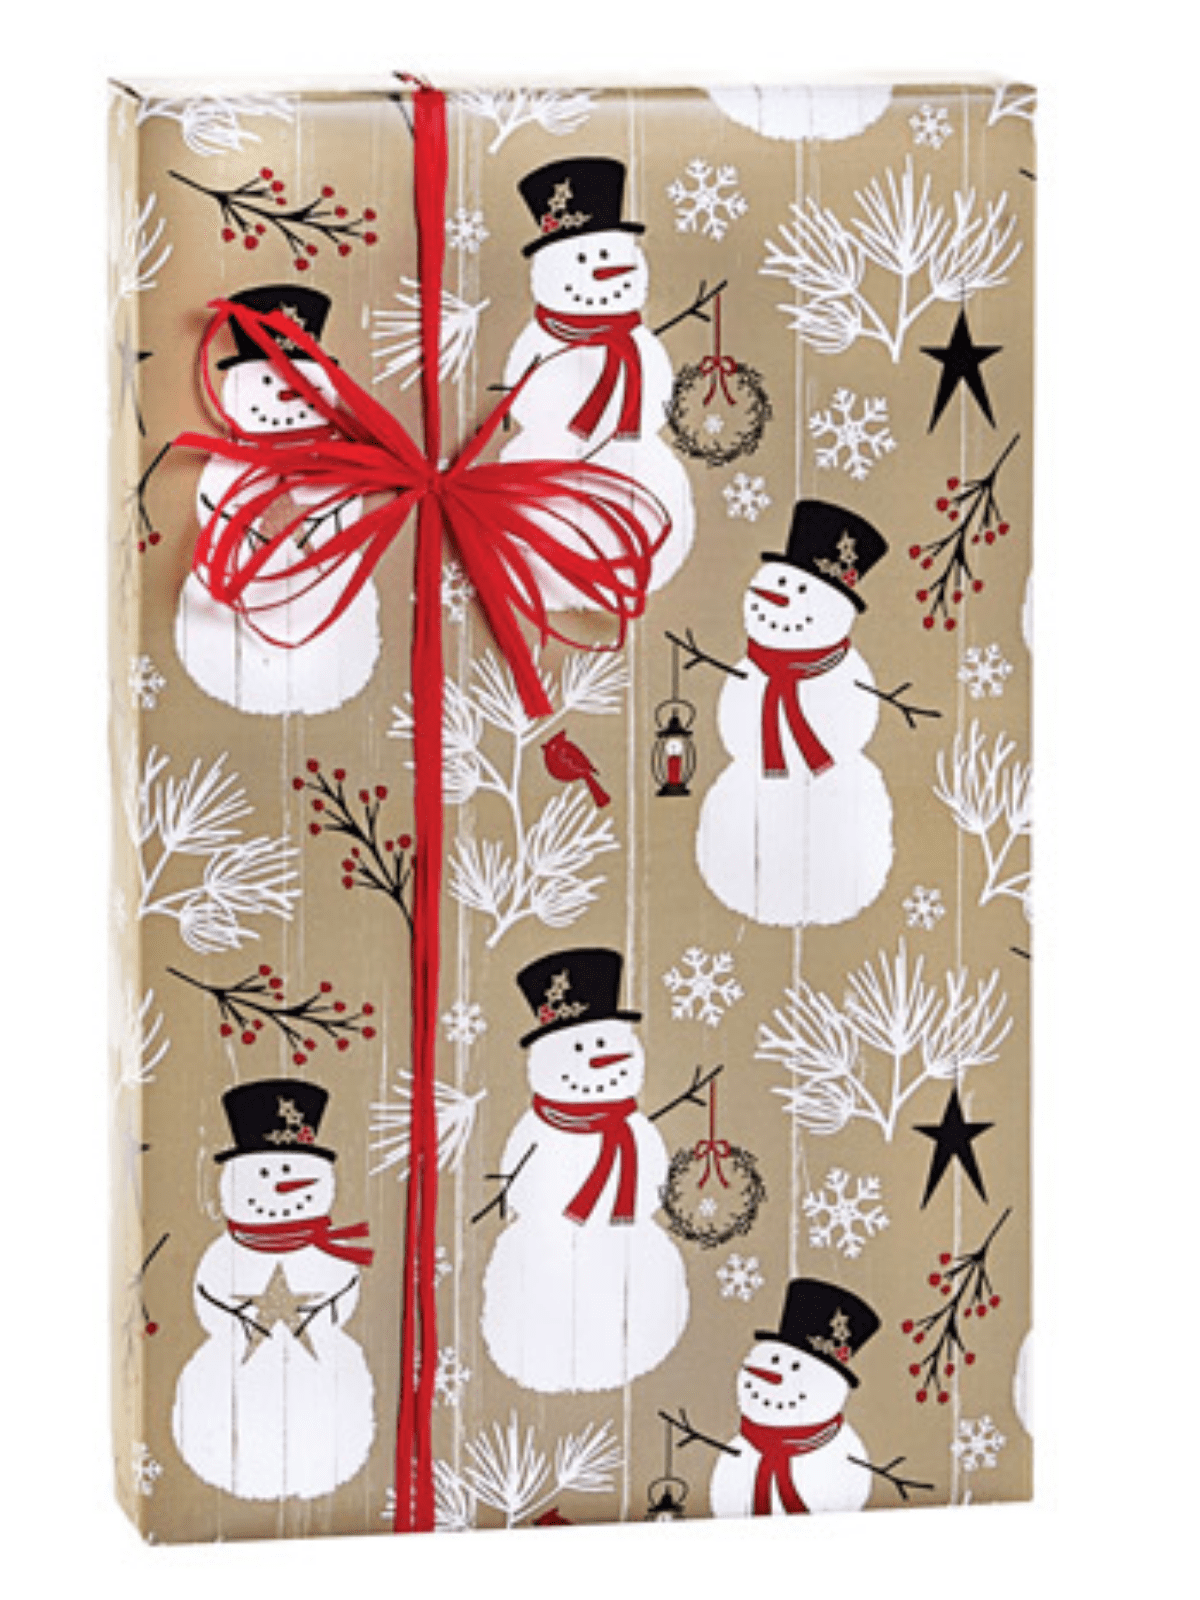 Wrapping Paper Christmas, Christmas Paper, Christmas Gift Wrap, Snowman Christmas  Wrap, Wrapping Paper Rolls, Cute Holiday Gift Wrap Wps0152 